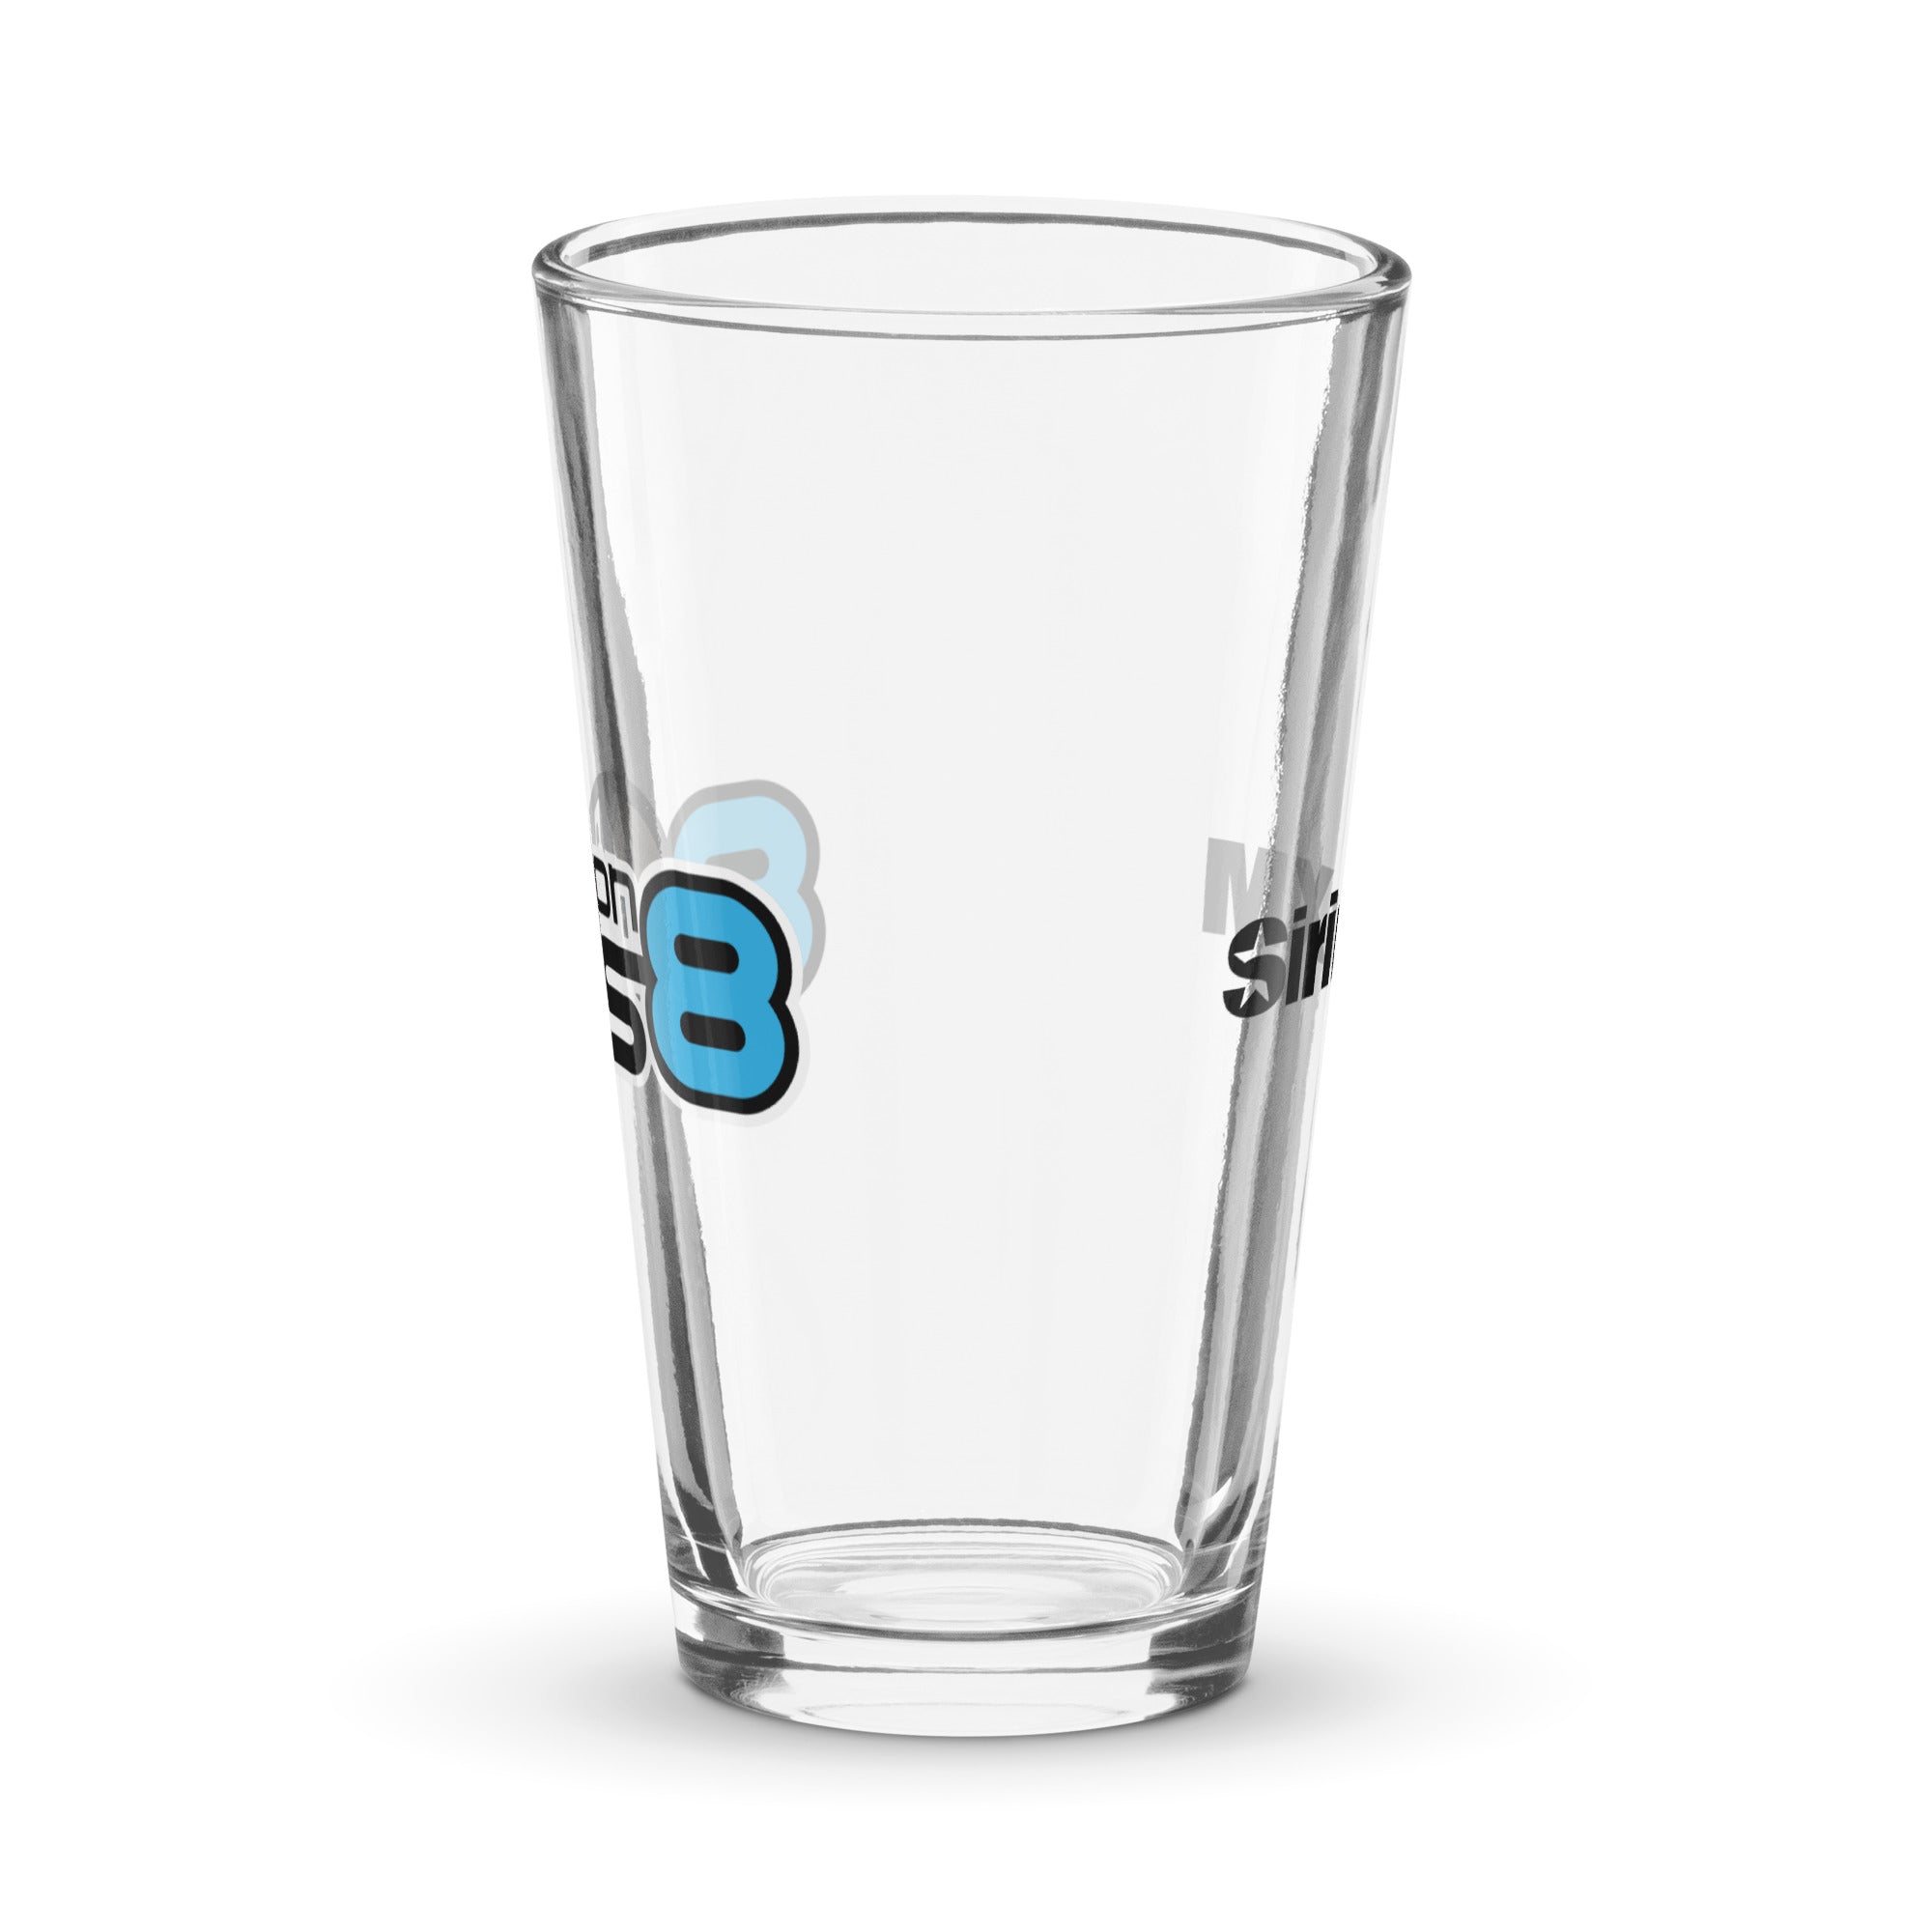 80s on 8: Pint Glass